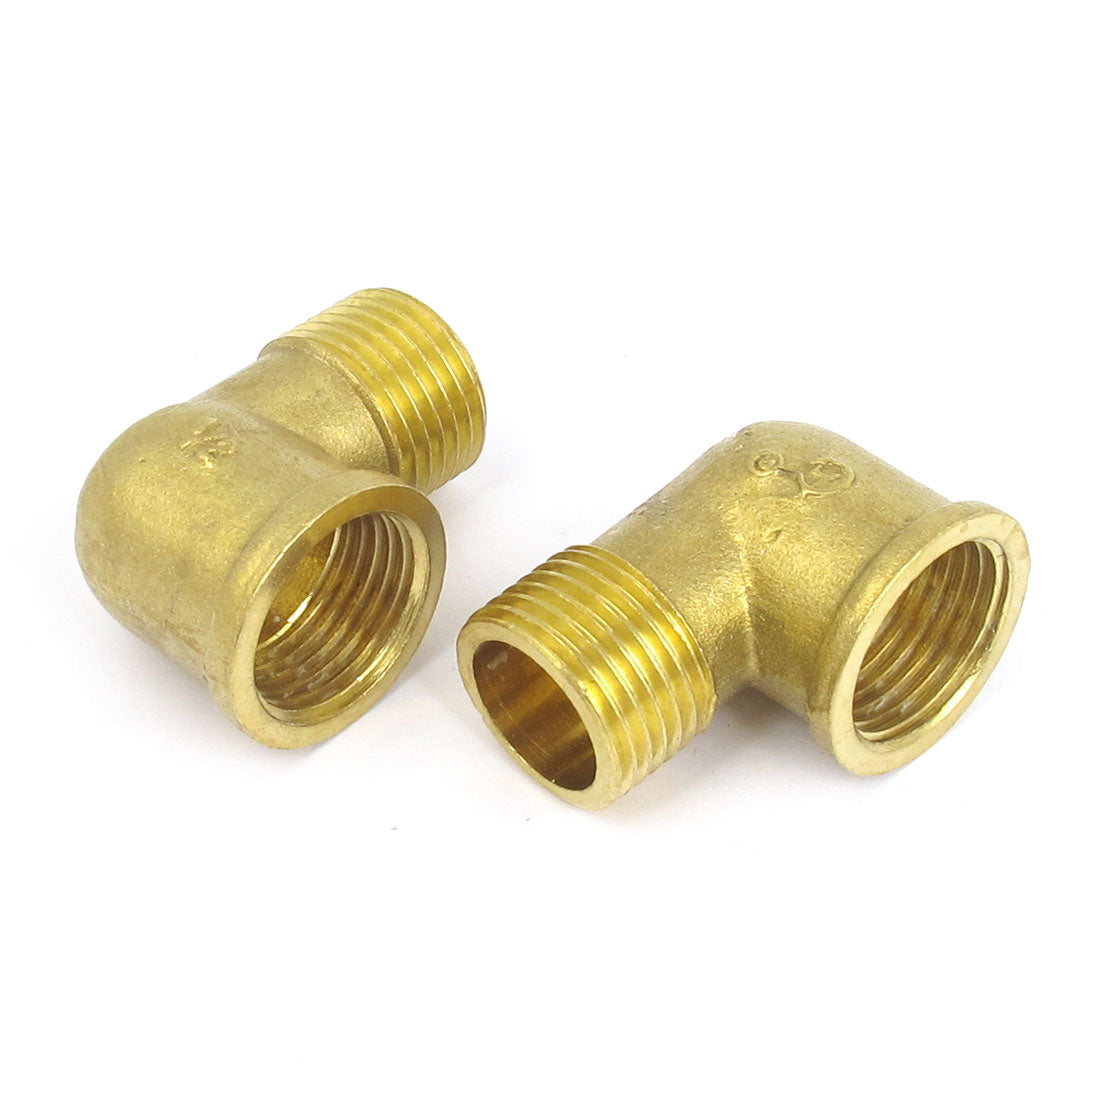 uxcell Uxcell Brass Right Angle 1/2BSP Male to Female Elbow Connector Coupler Fitting Adapter 2PCS